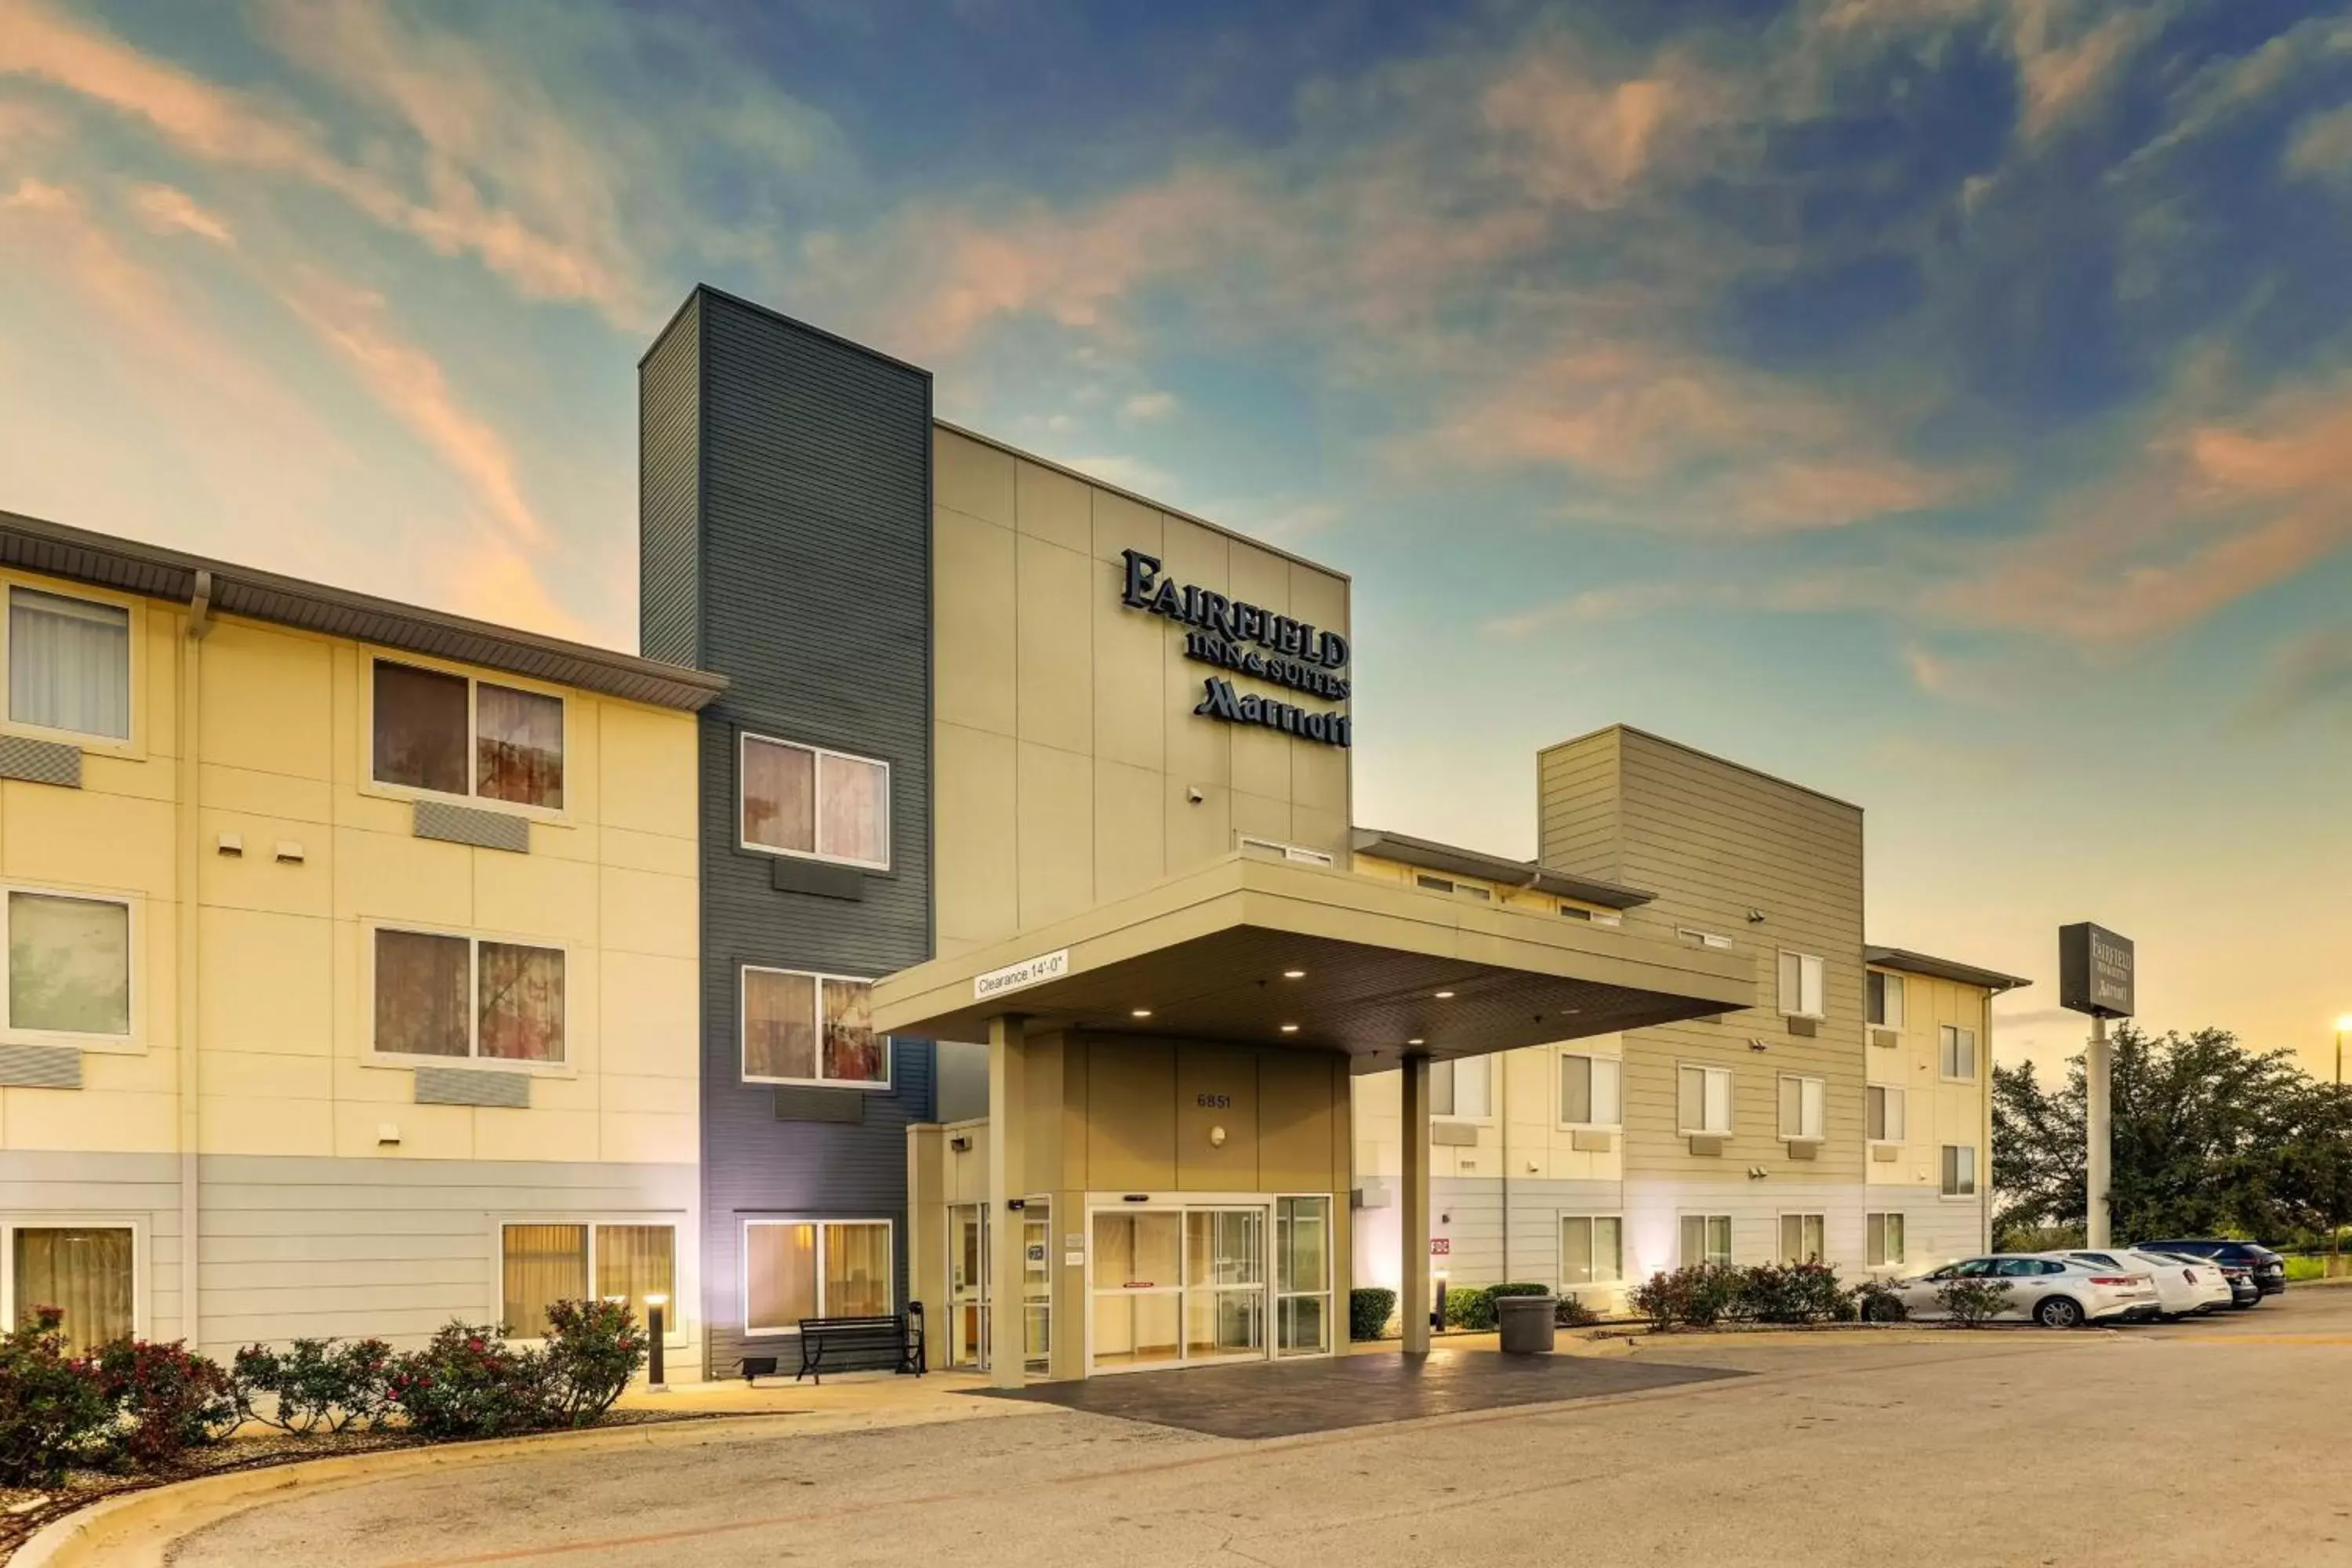 Property Building in Fairfield Inn & Suites by Marriott Fort Worth I-30 West Near NAS JRB